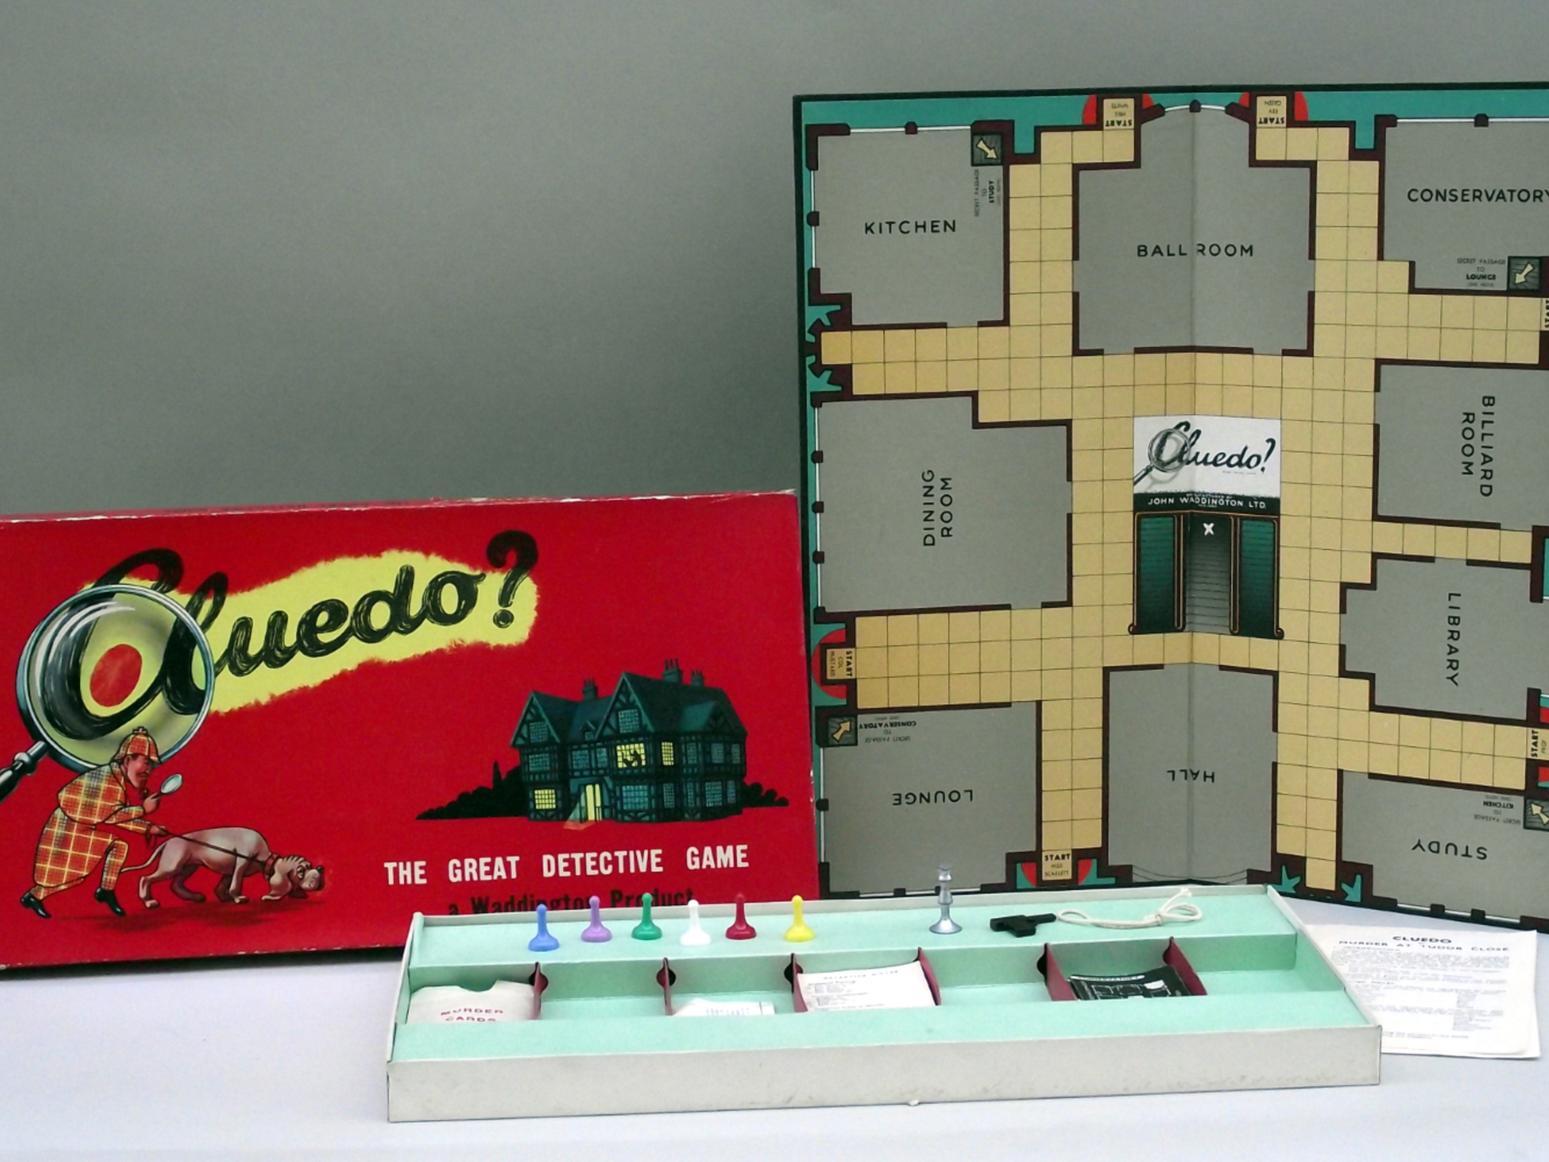 A true table top classic, Cluedo was among the most famous board games produced by Leeds-based Waddingtons.